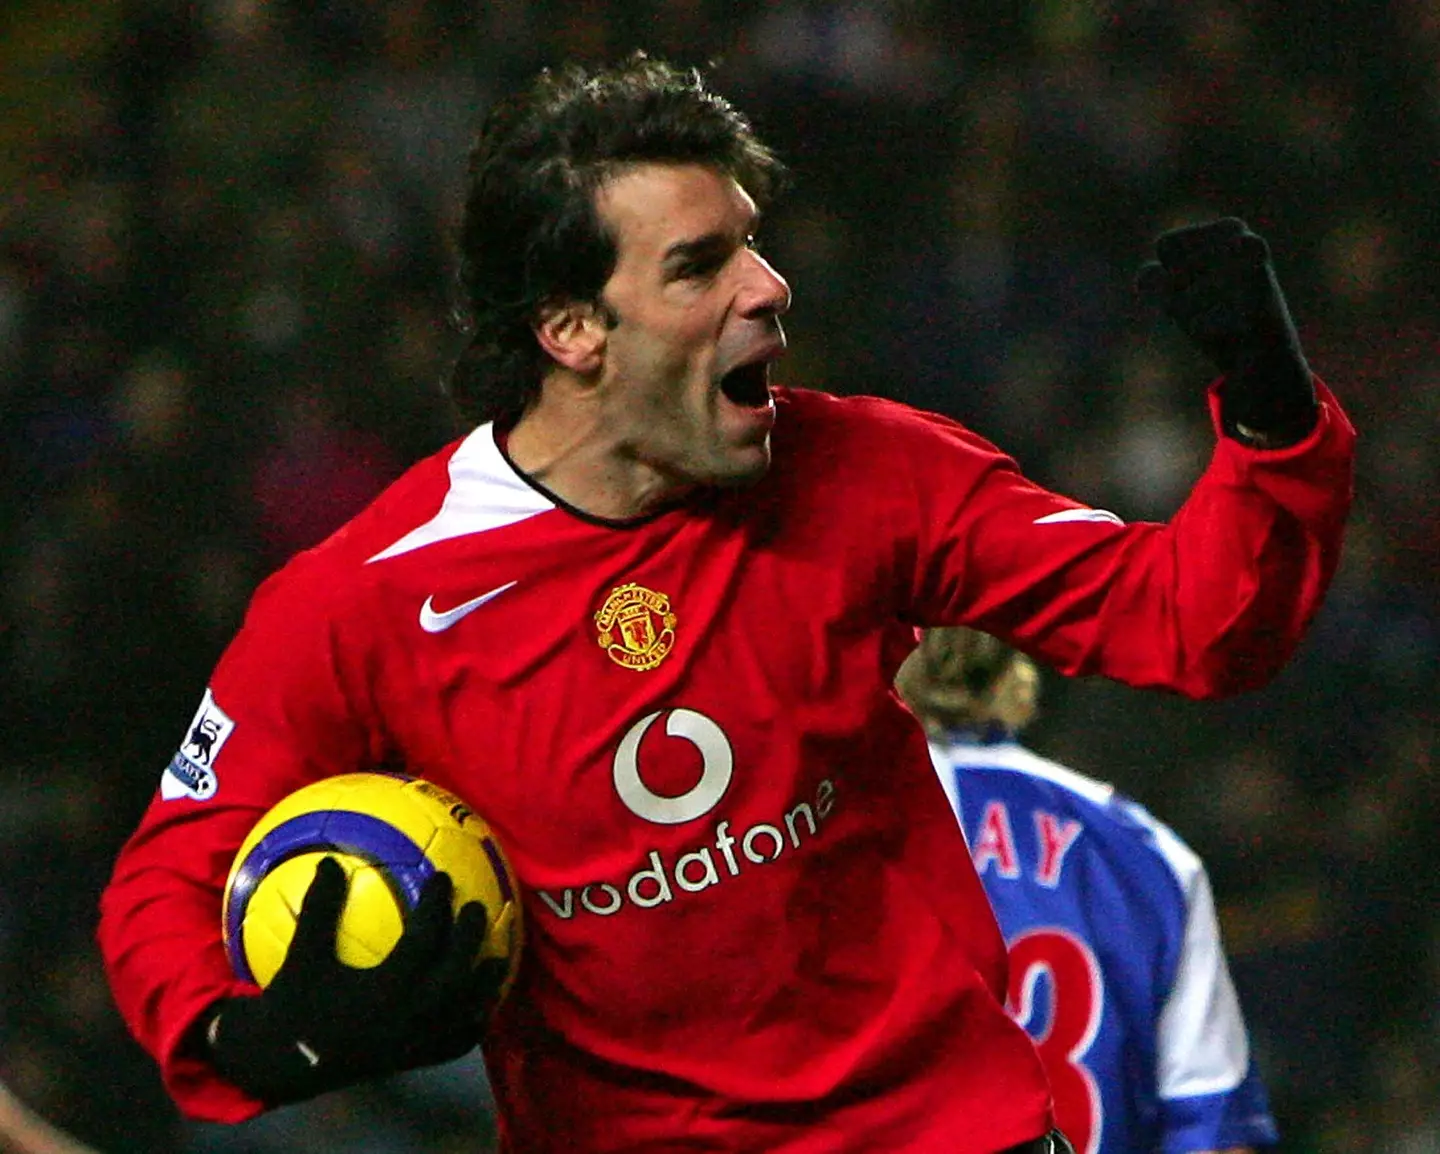 Ruud van Nistelrooy celebrates scoring a goal for Manchester United. Image: Alamy 